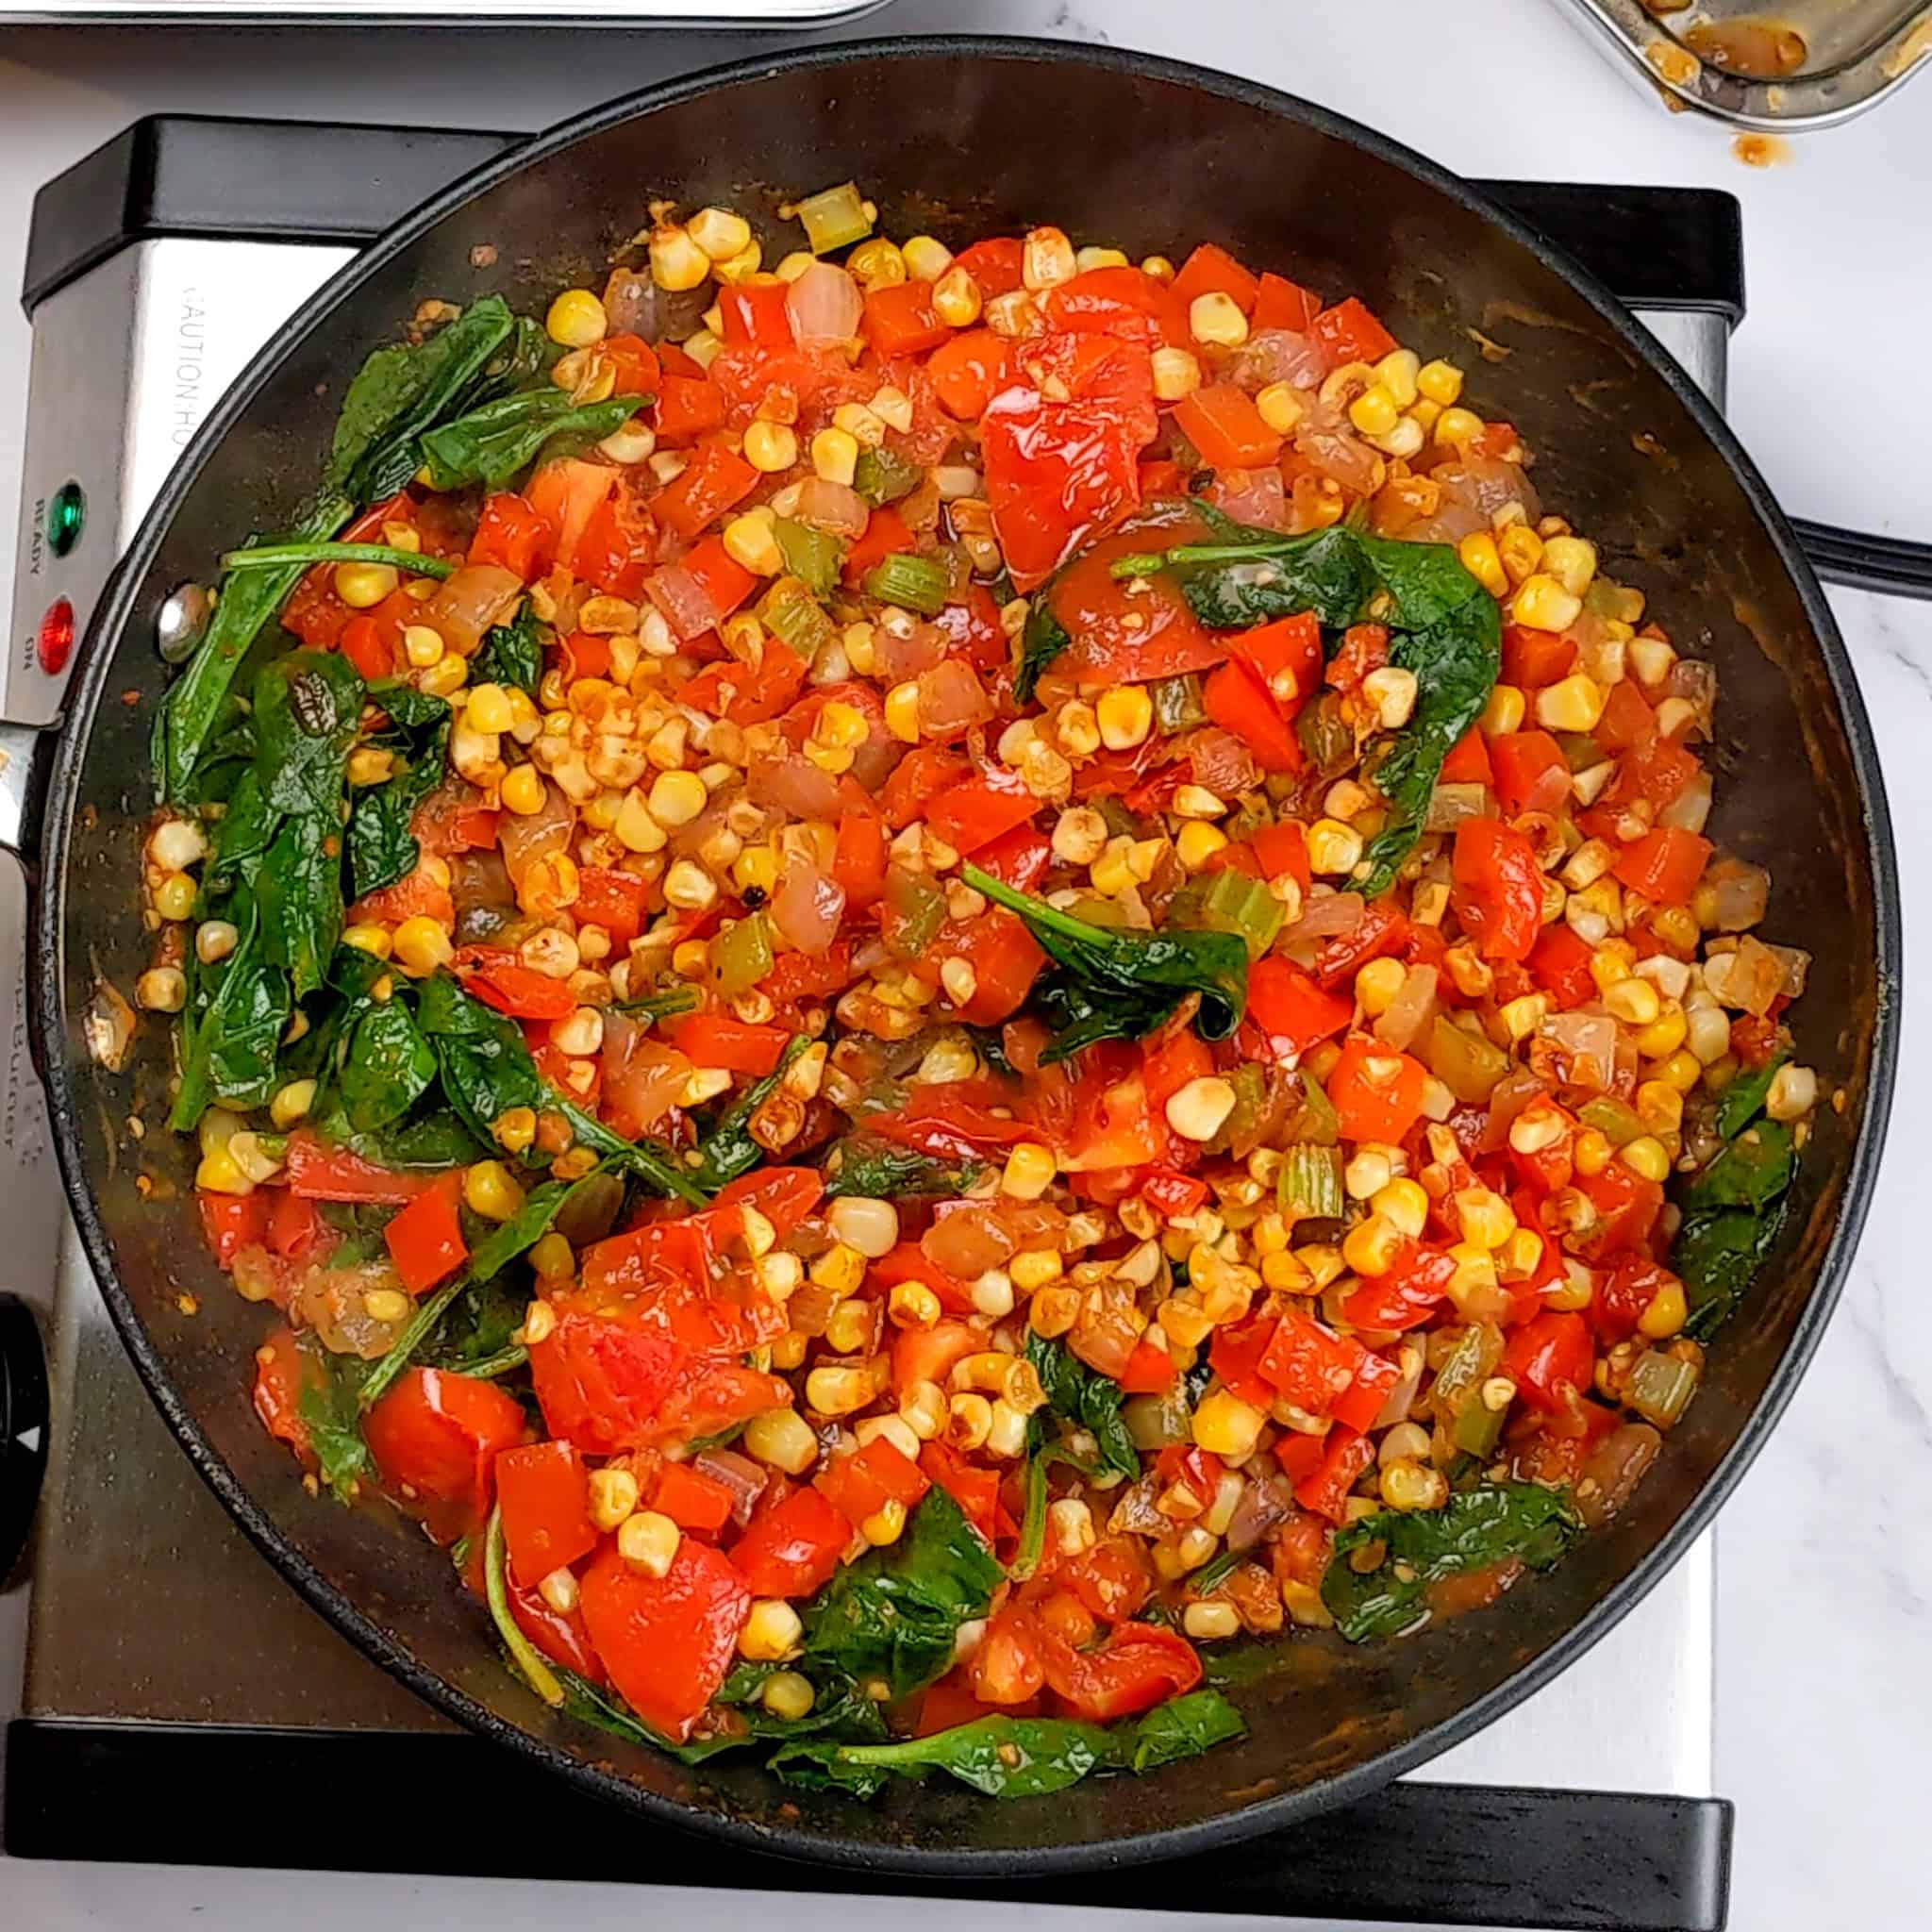 the cooked vegetables medley of corn, red bell pepper, red onion, celery and baby spinach in a skillet.